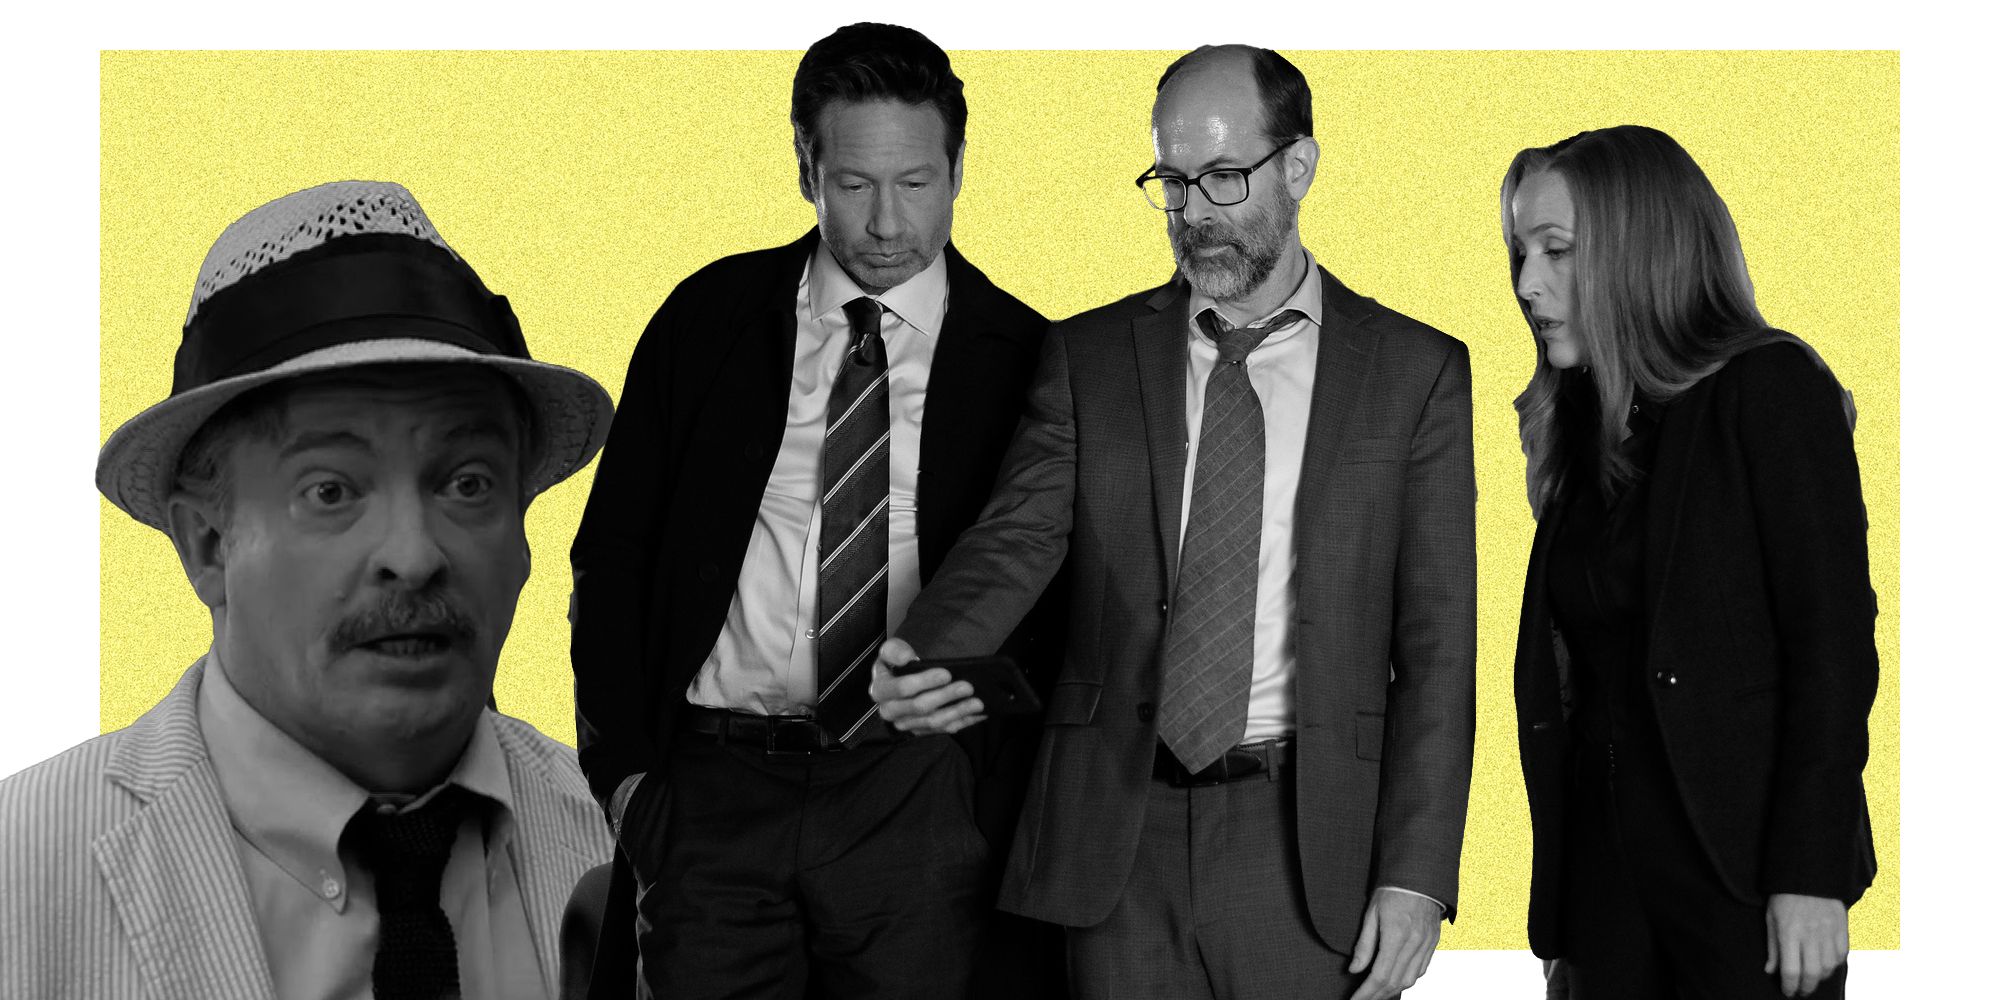 Rhys Darby David Duchovny Brian Huskey and Gillian Anderson in The X-Files